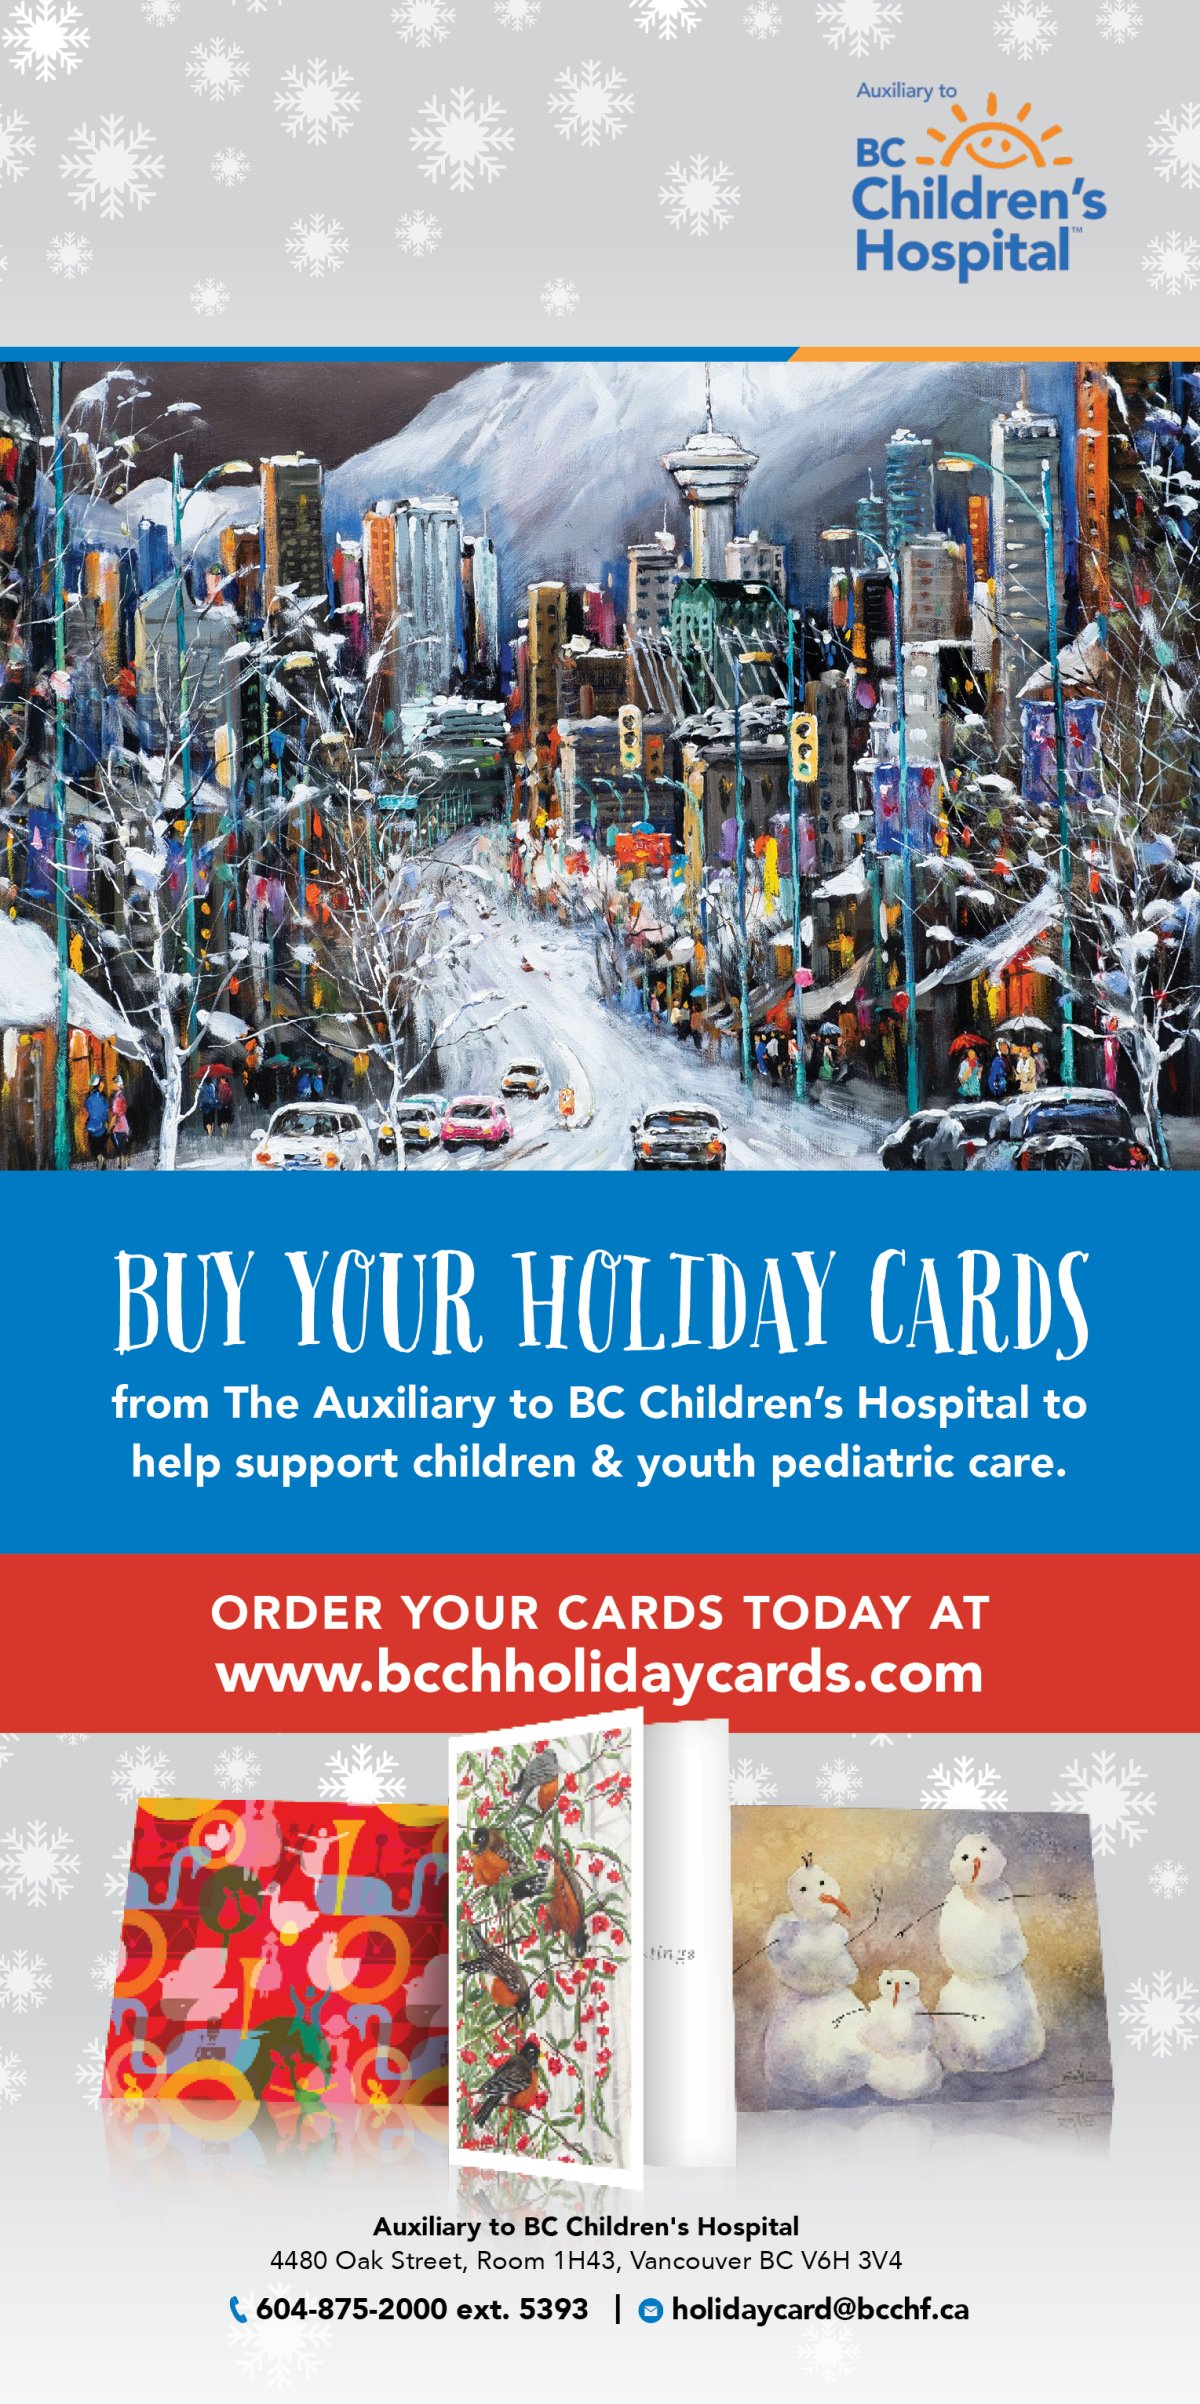 Auxiliary to BC Children’s Hospital Holiday Cards Program - image